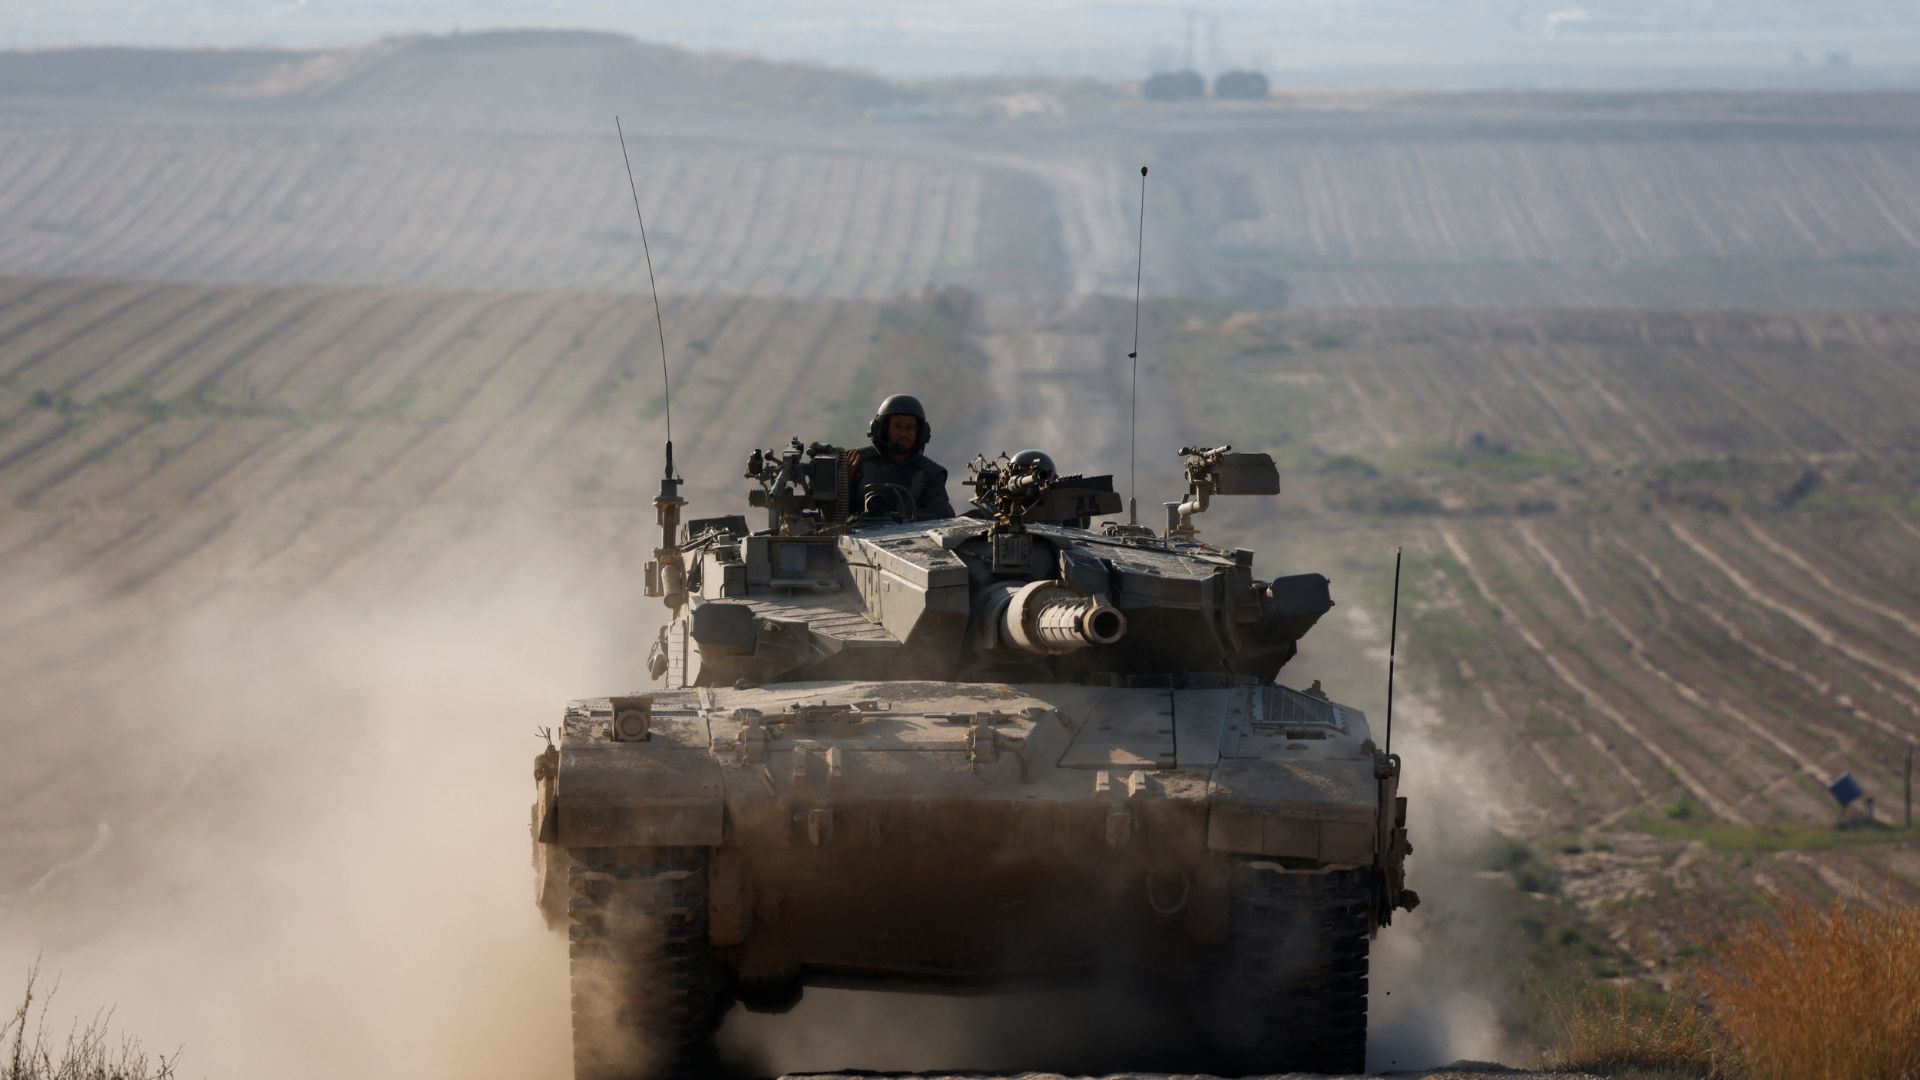 An Israeli tank maneuvers near the border with Gaza – but more troops have withdrawn. /Amir Cohen/Reuters